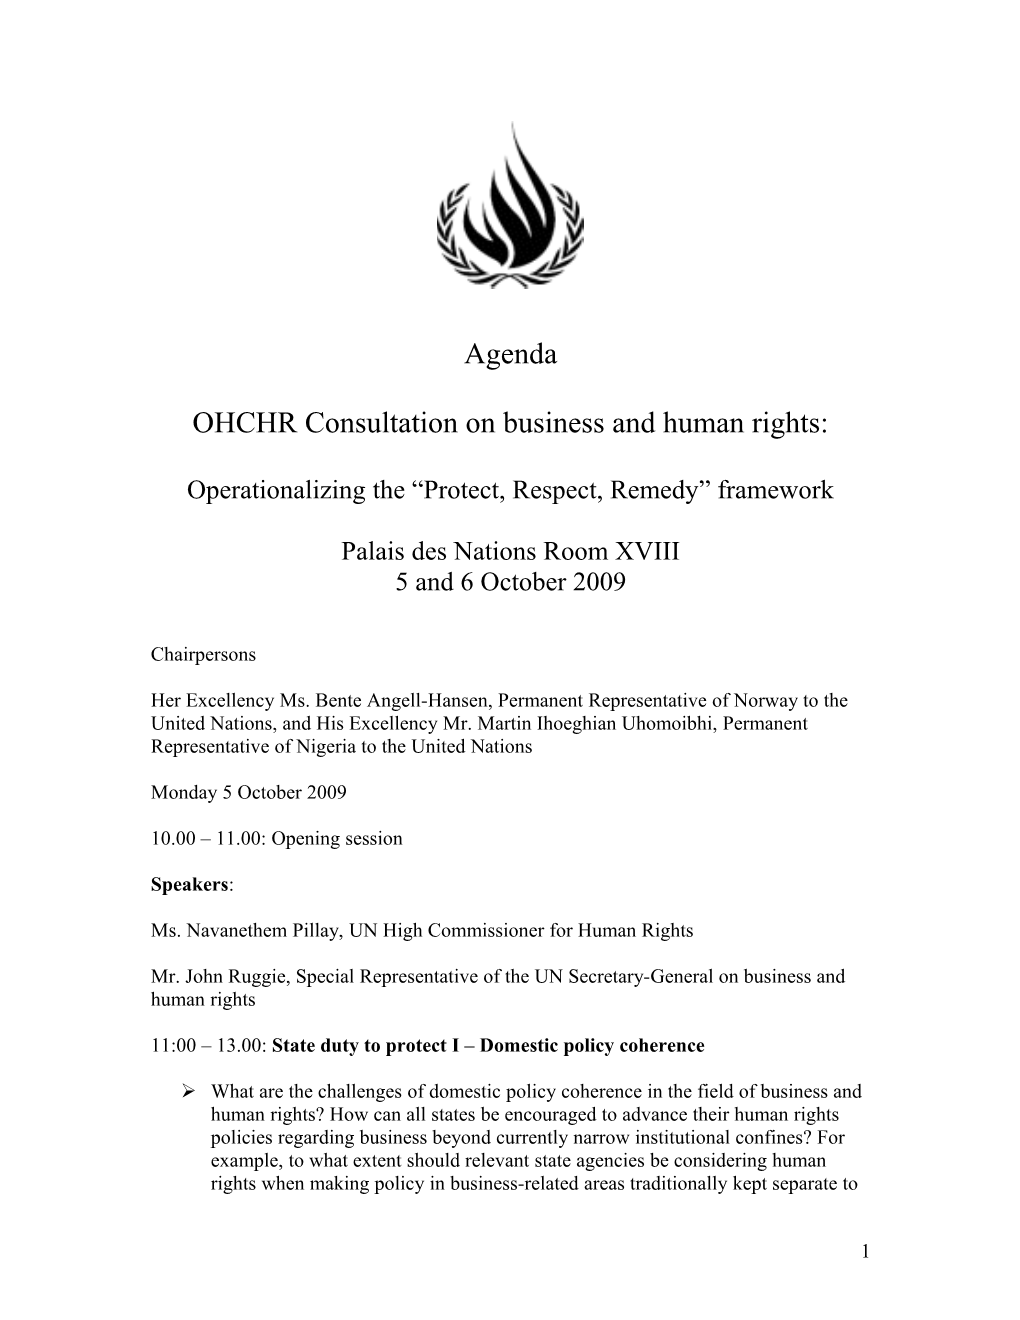 OHCHR Consultation on Business and Human Rights